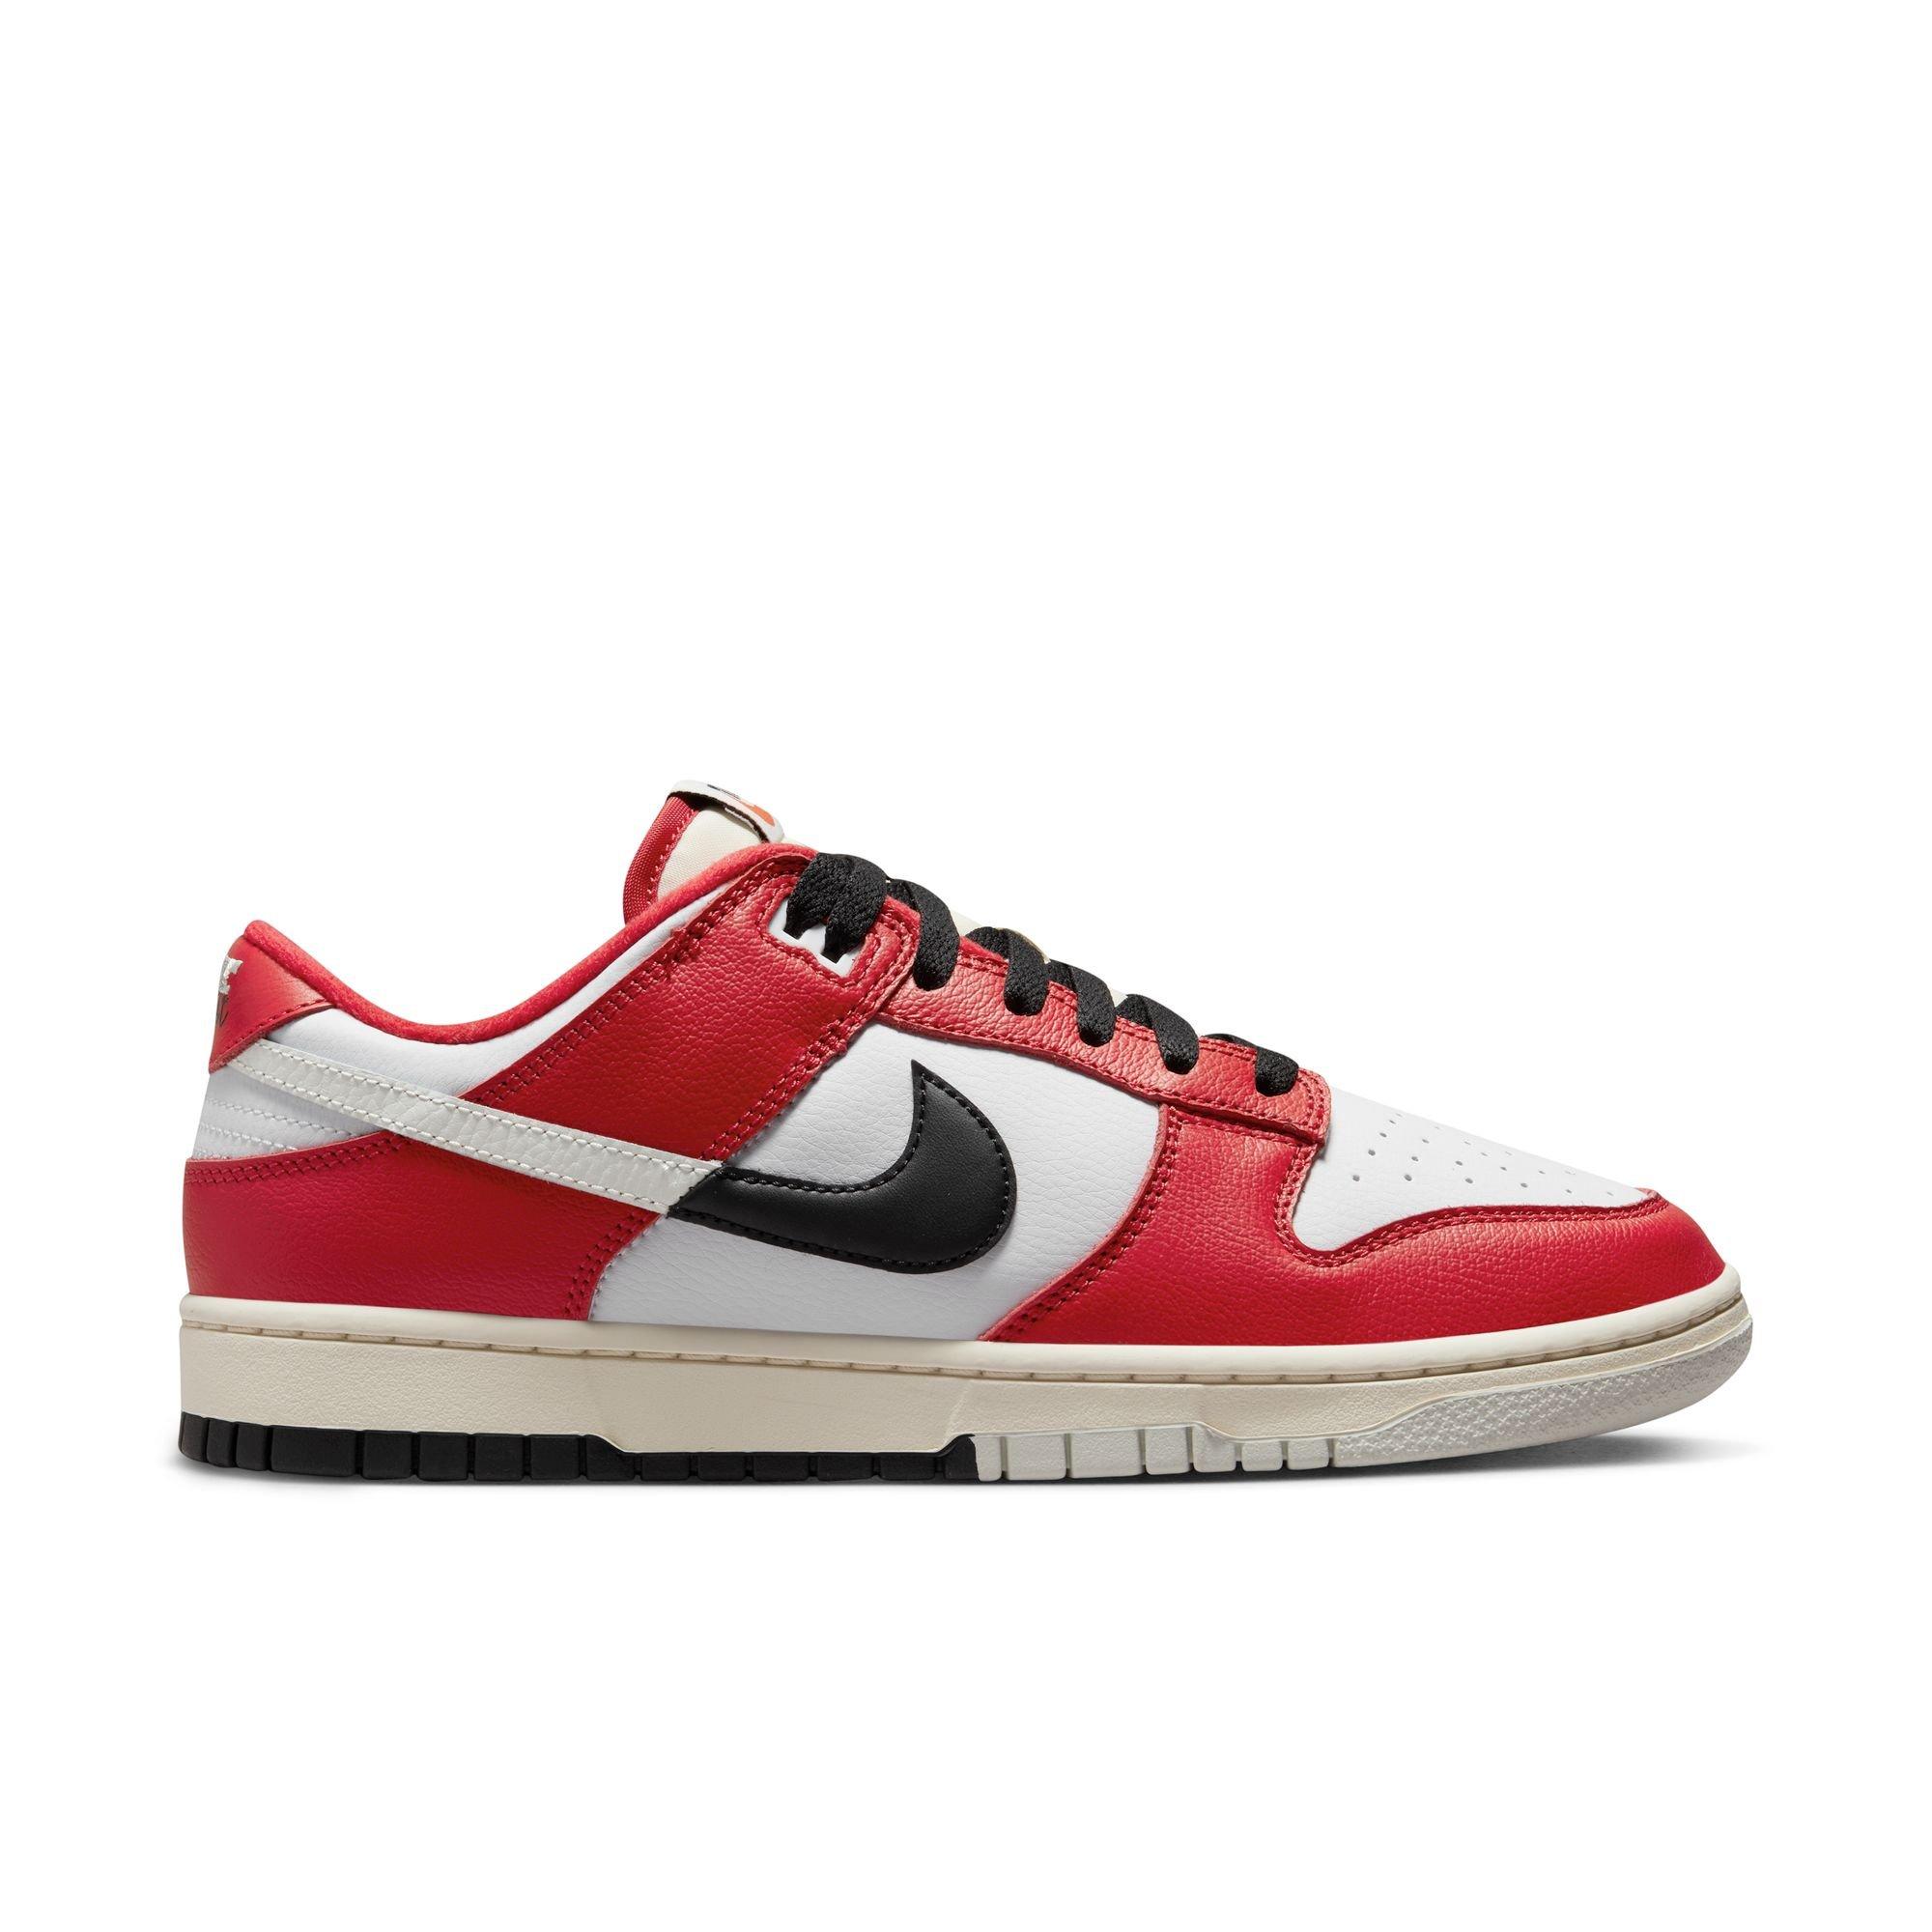 Red Nike Shoes & Sneakers - Hibbett